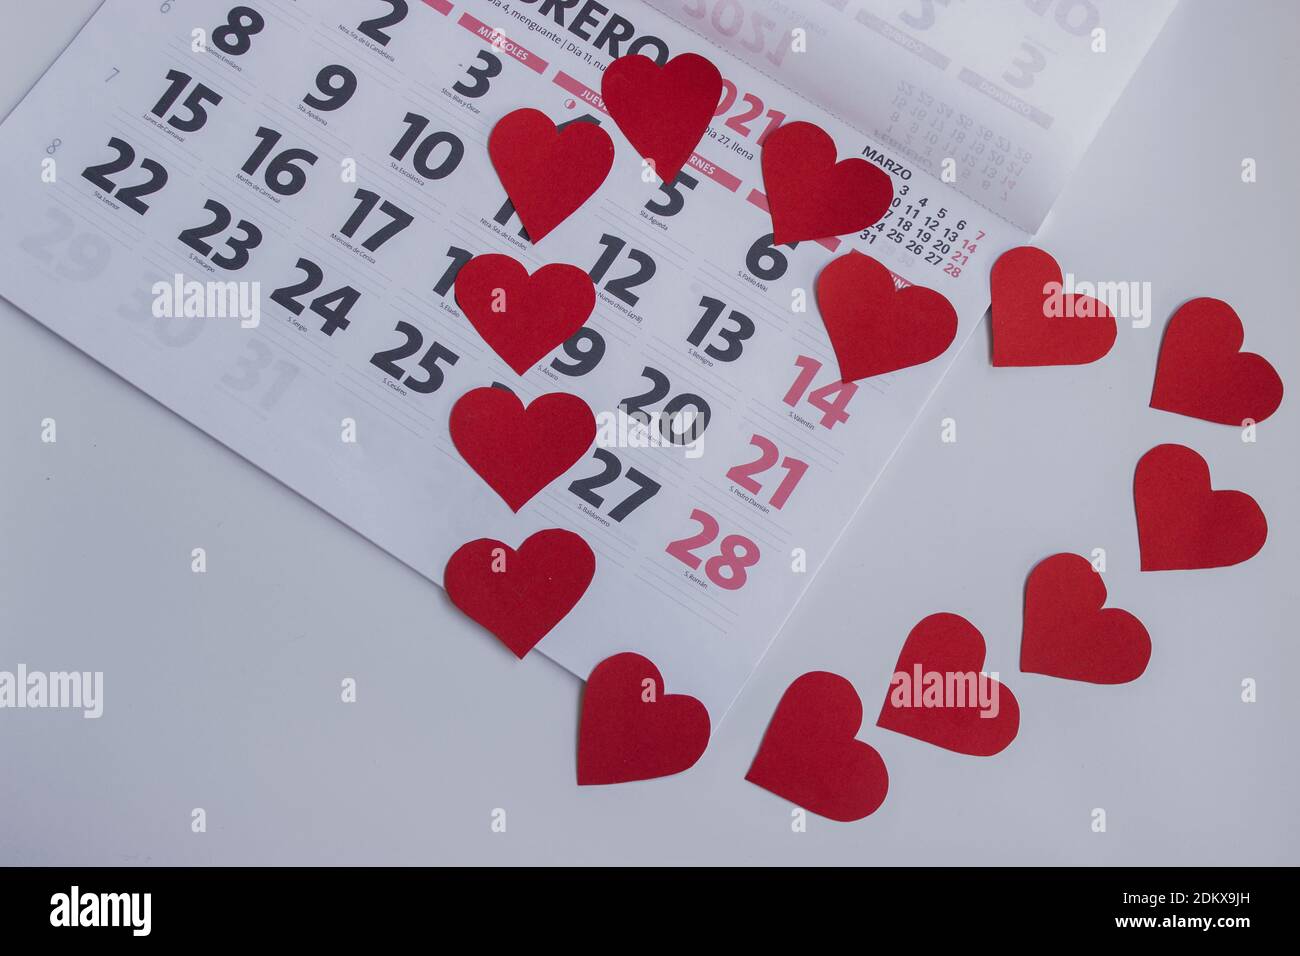 Conceptual Image Of 2021 Set Of Hearts Forming A Heart Shape On The February 2021 Calendar Around Valentine S Day 14th February Marked With Hearts Stock Photo Alamy Free printable february 2021 calendar templates. alamy